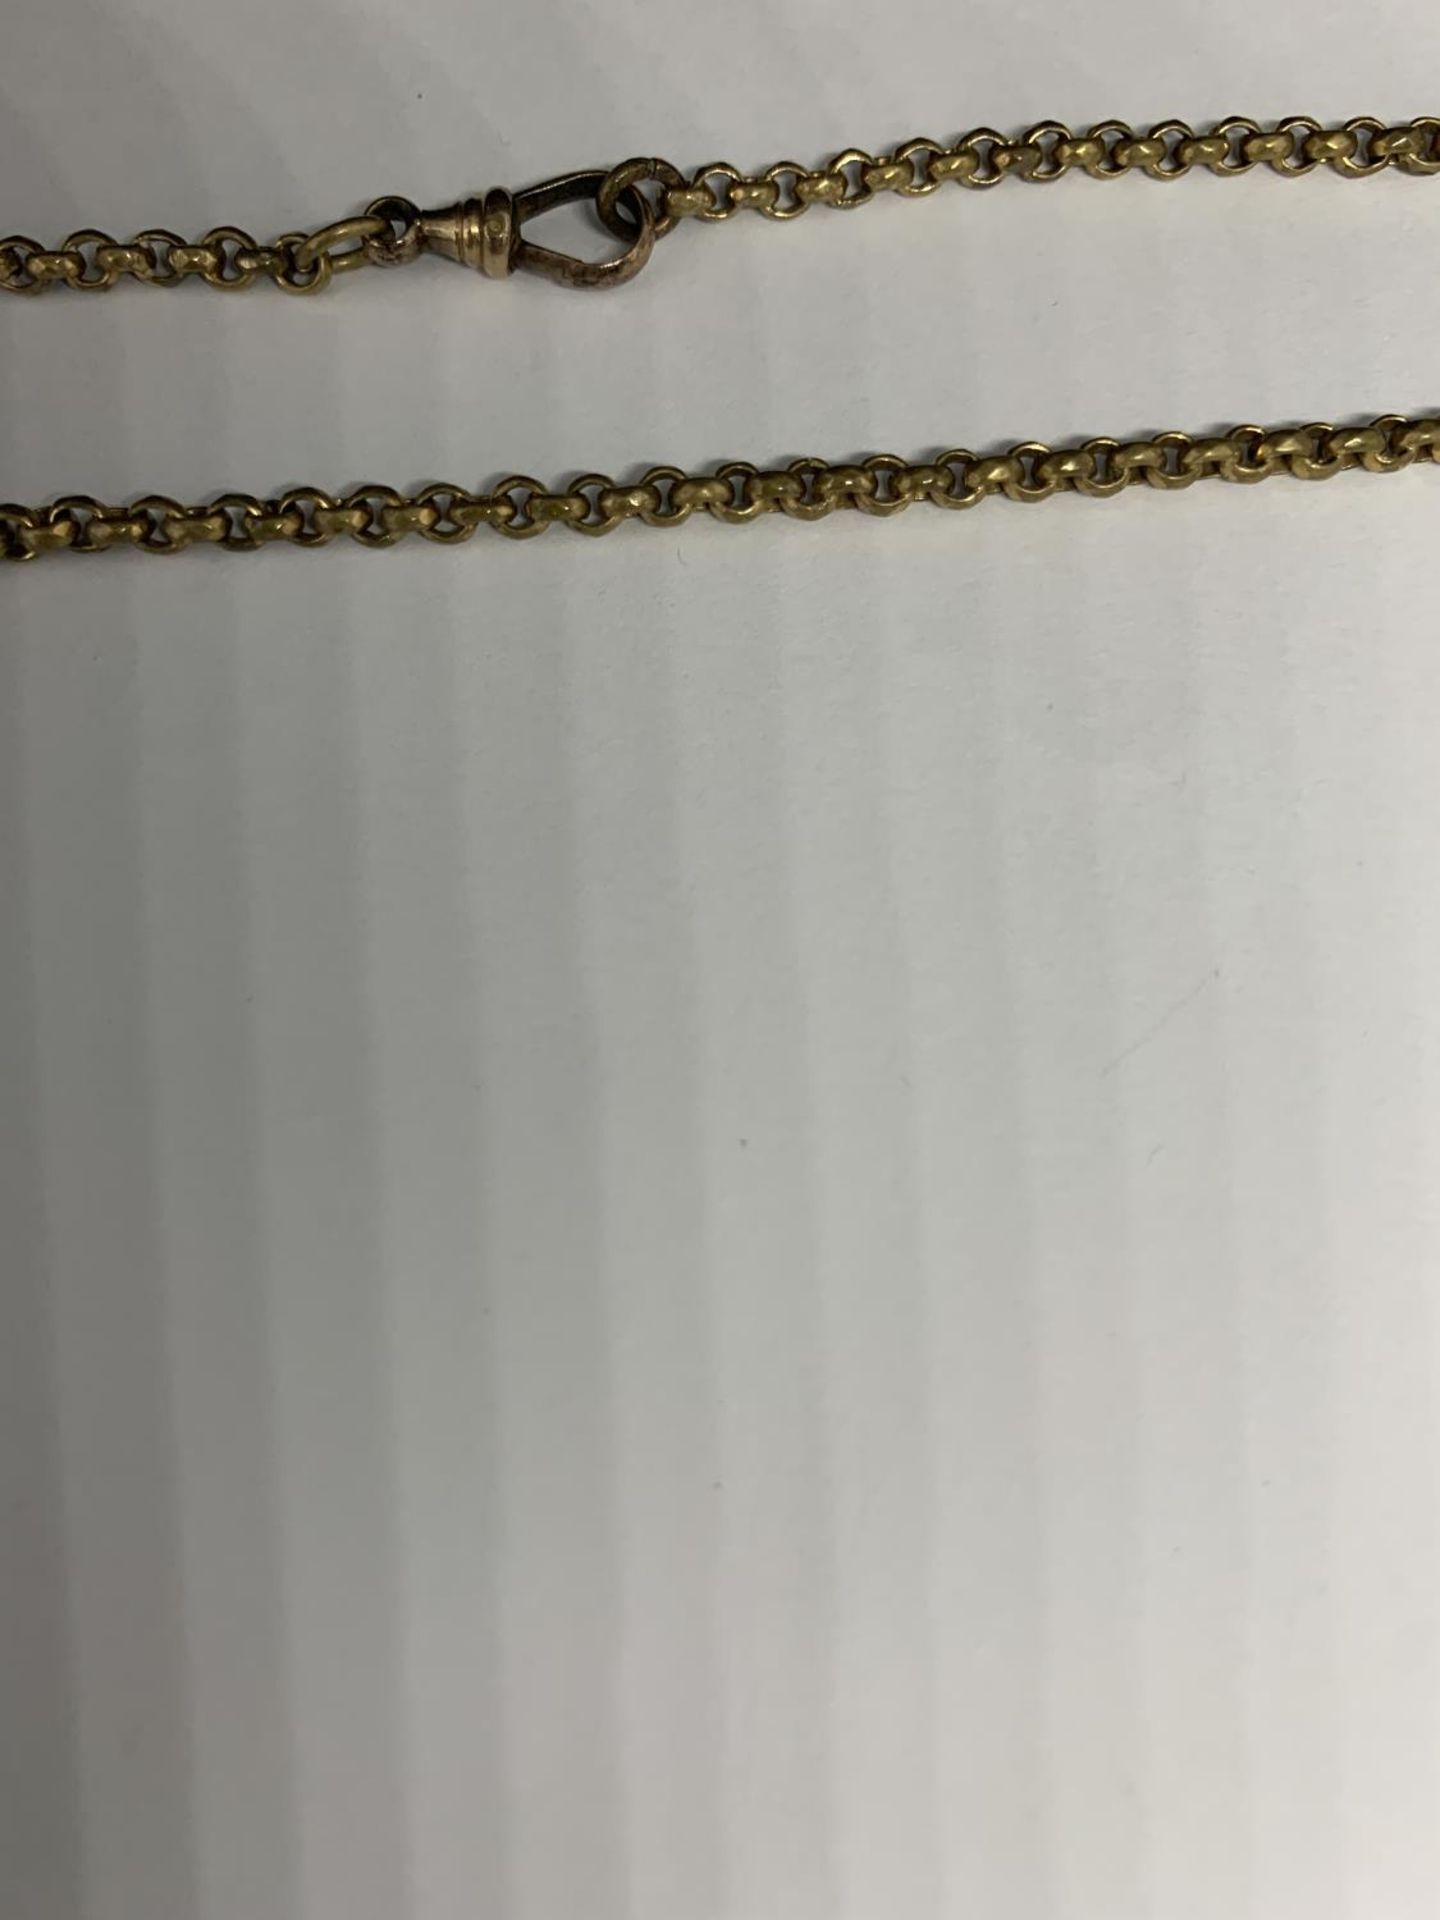 A MUFF CHAIN LENGTH 56 INCHES - Image 3 of 3